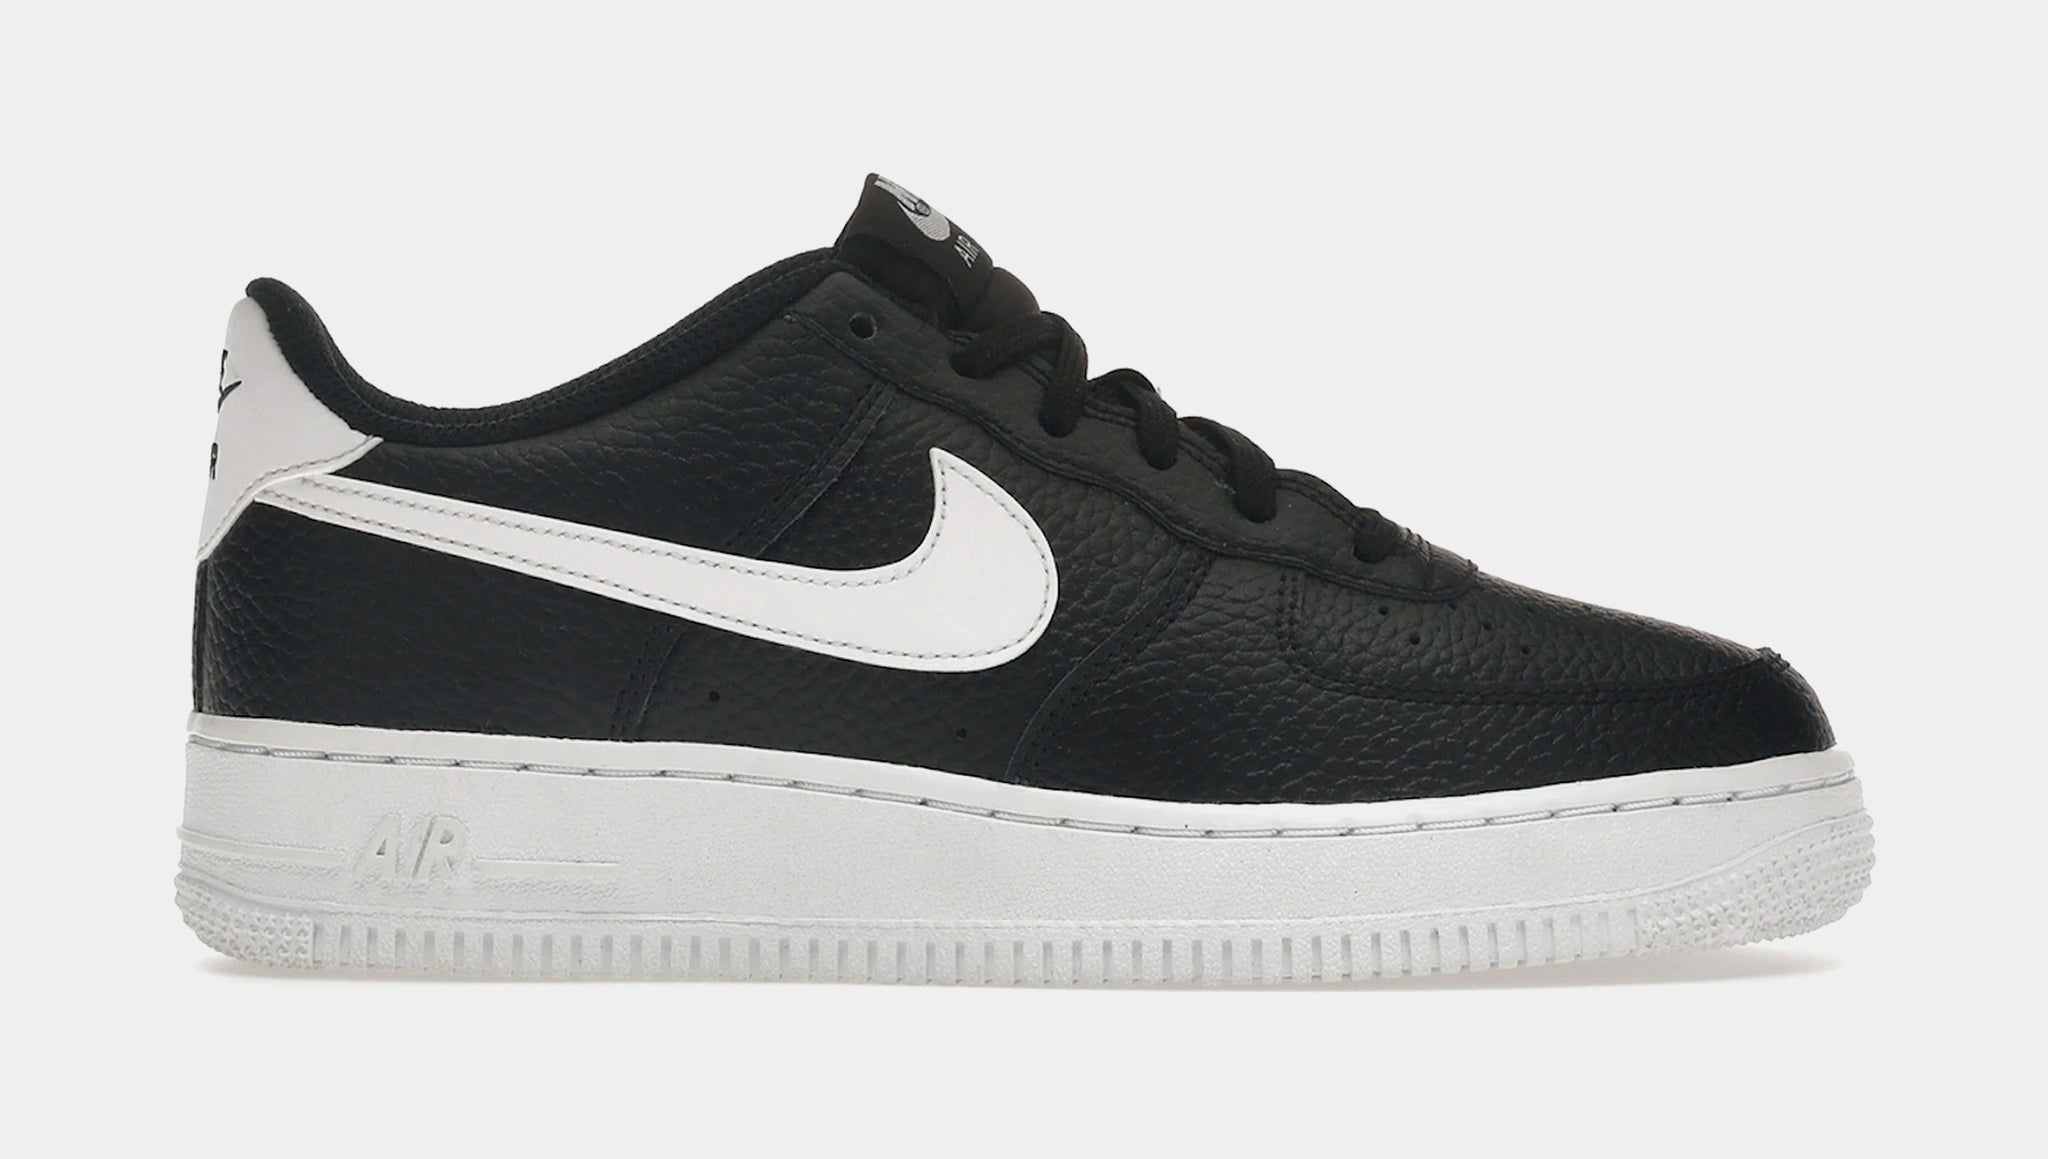 Nike Air Force 1 LV8 Grade School Casual Shoes